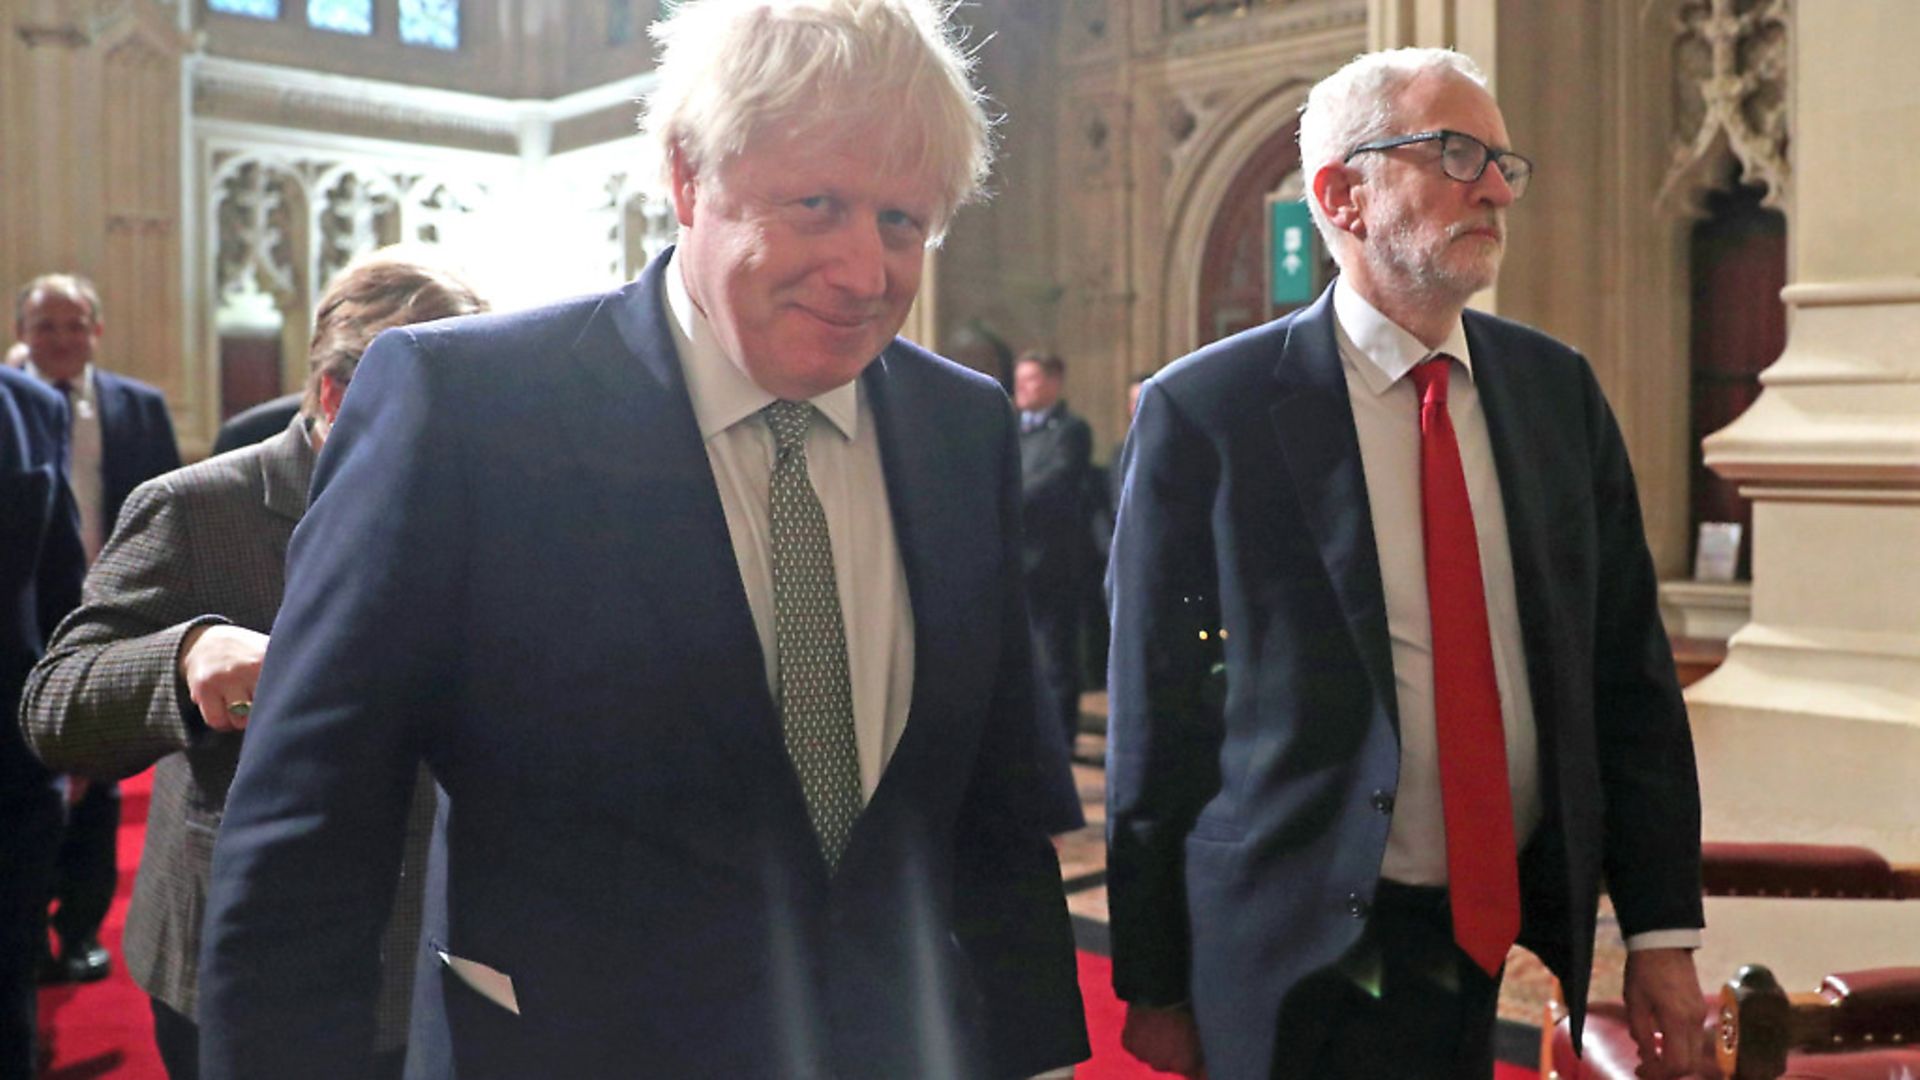 Boris Johnson and Jeremy Corbyn at the State Opening of Parliament. Photograph: Hannah McKay/PA. - Credit: PA